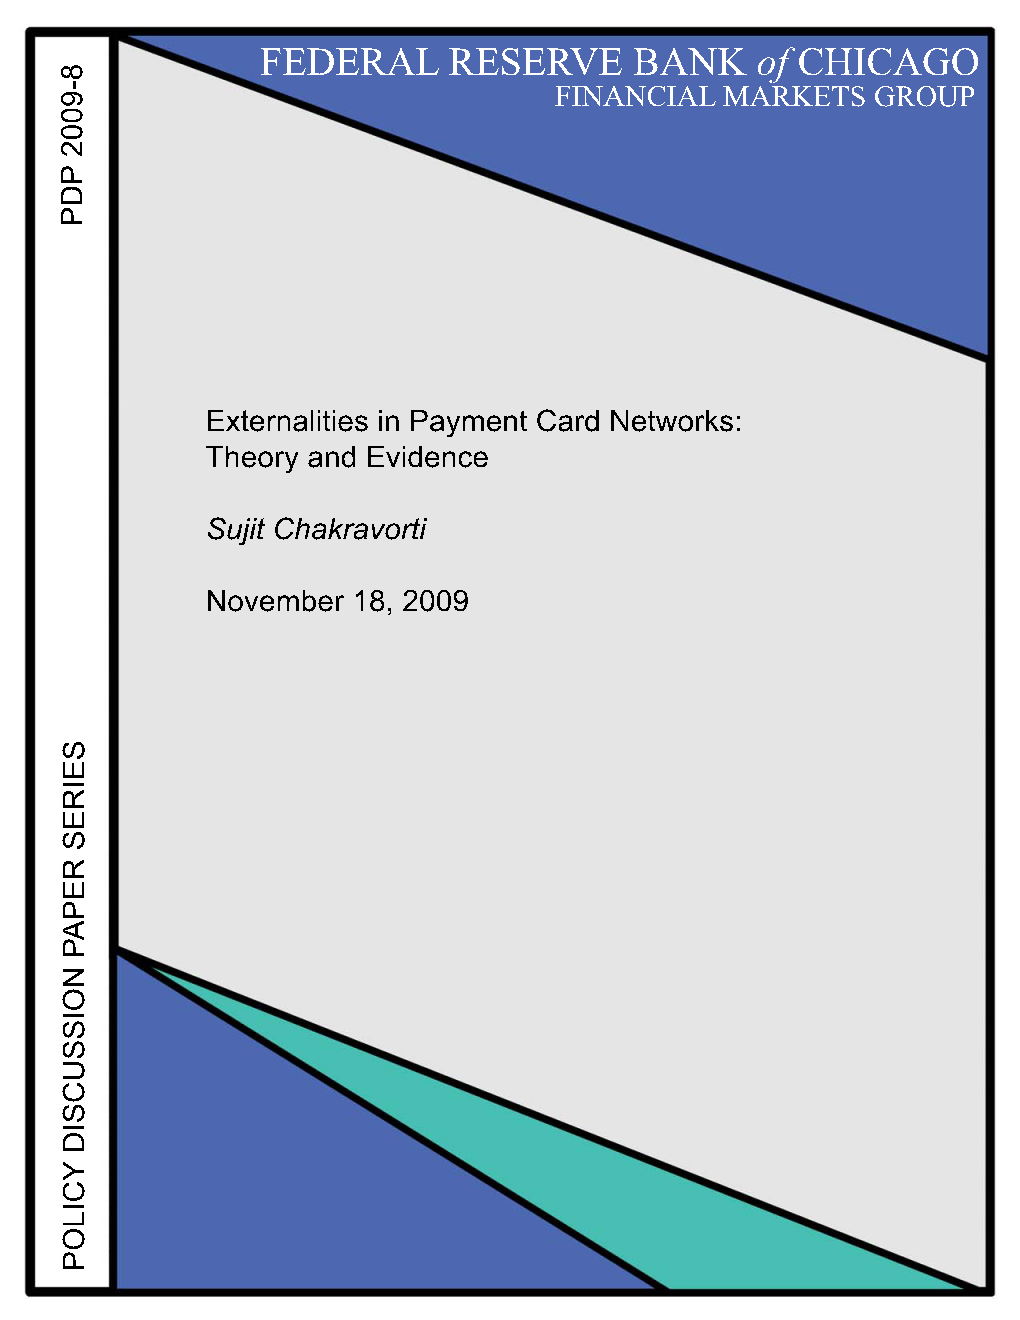 Externalities in Payment Card Networks: Theory and Evidence